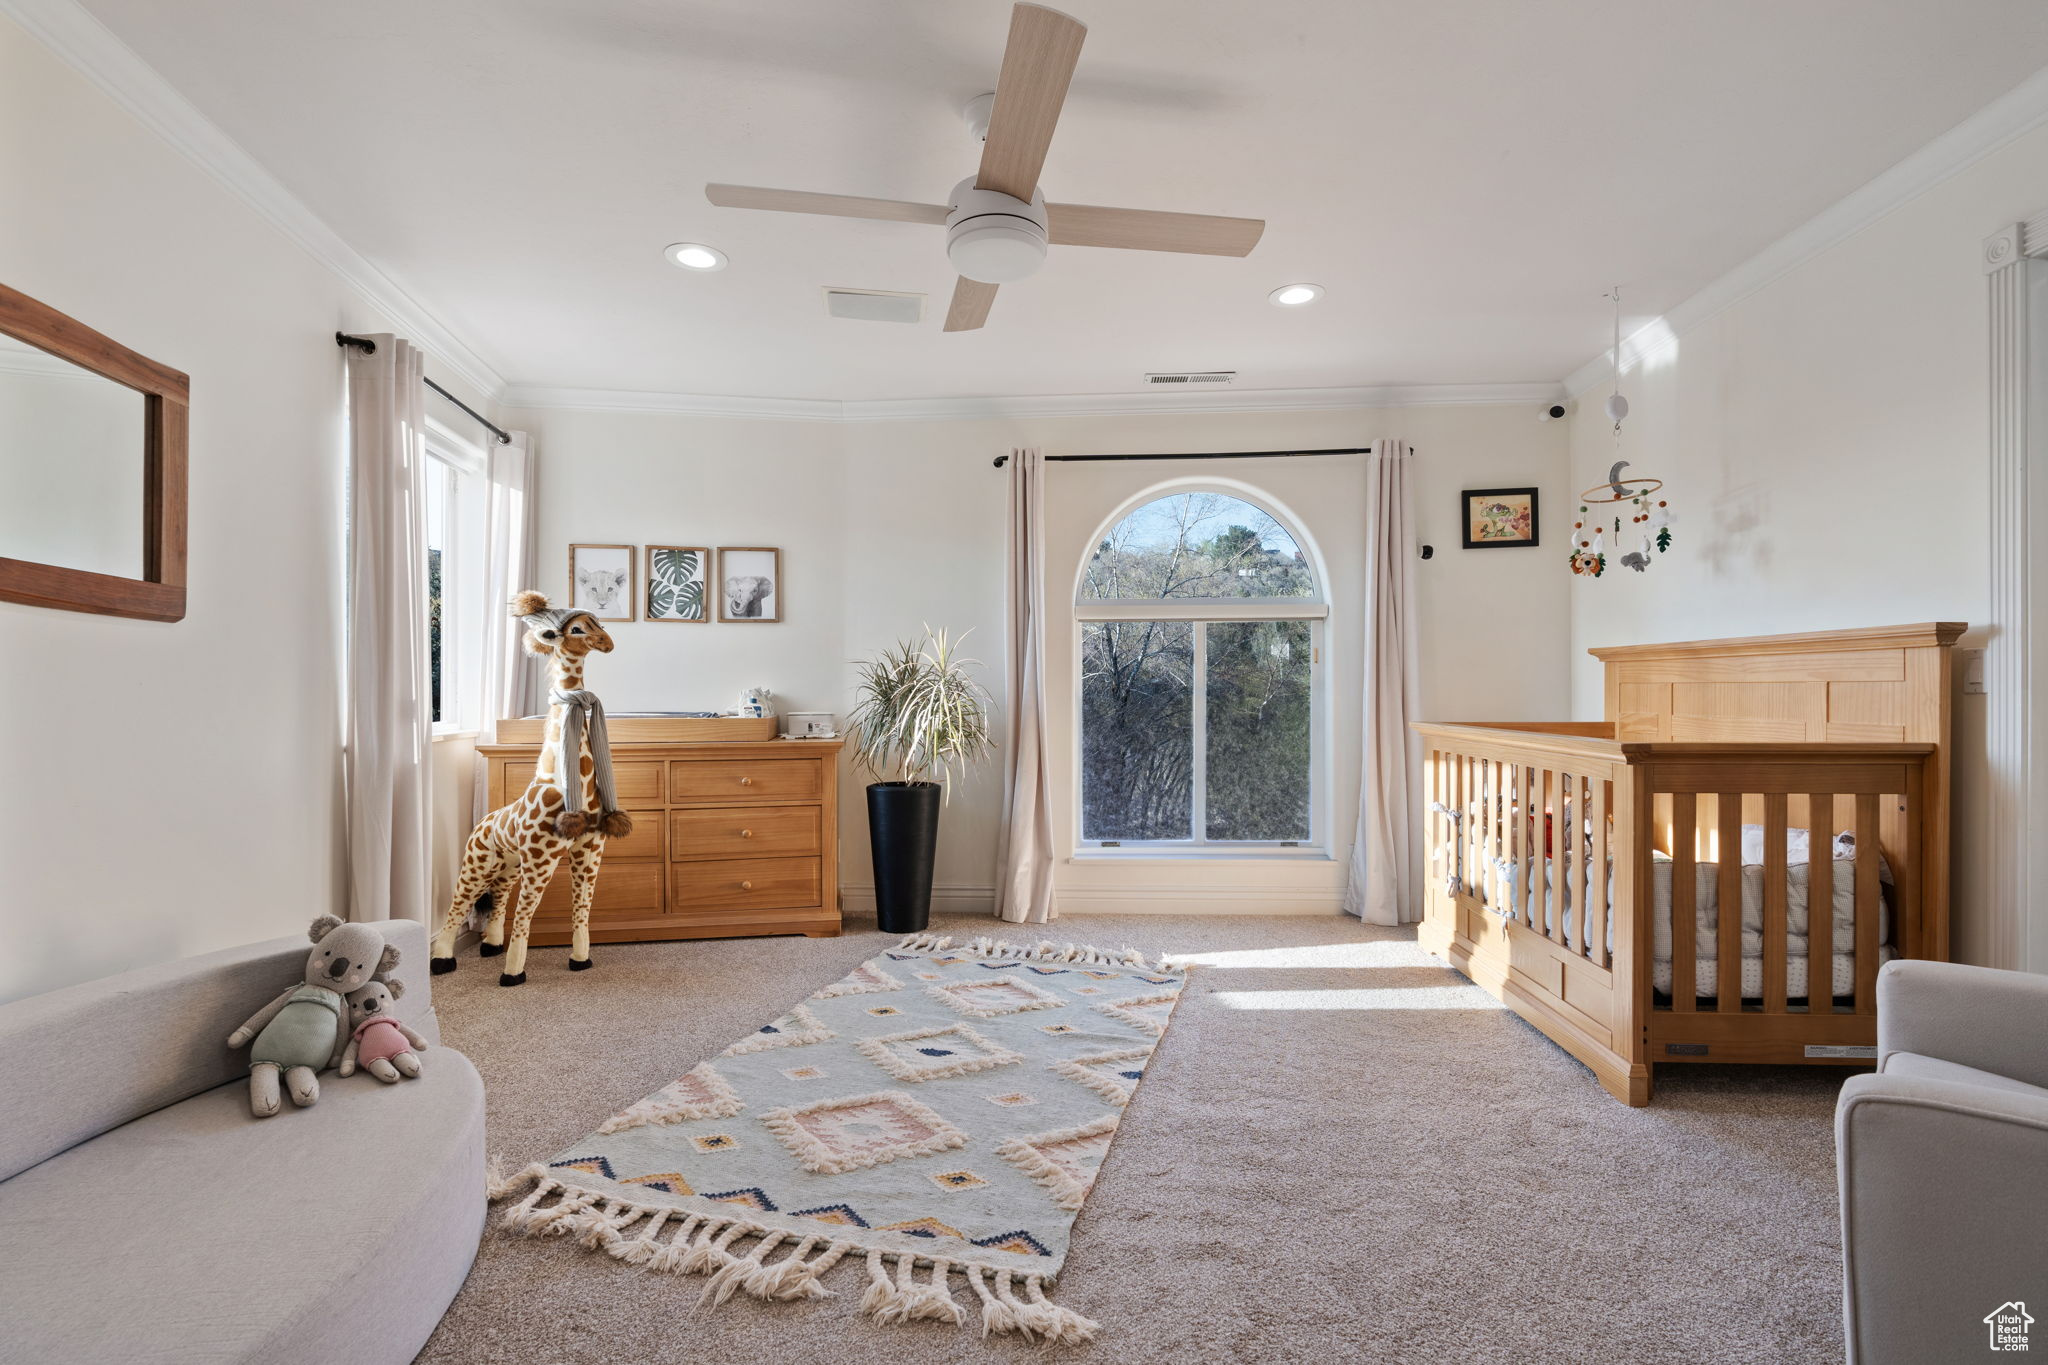 Carpeted bedroom with ceiling fan, crown molding, and a nursery area